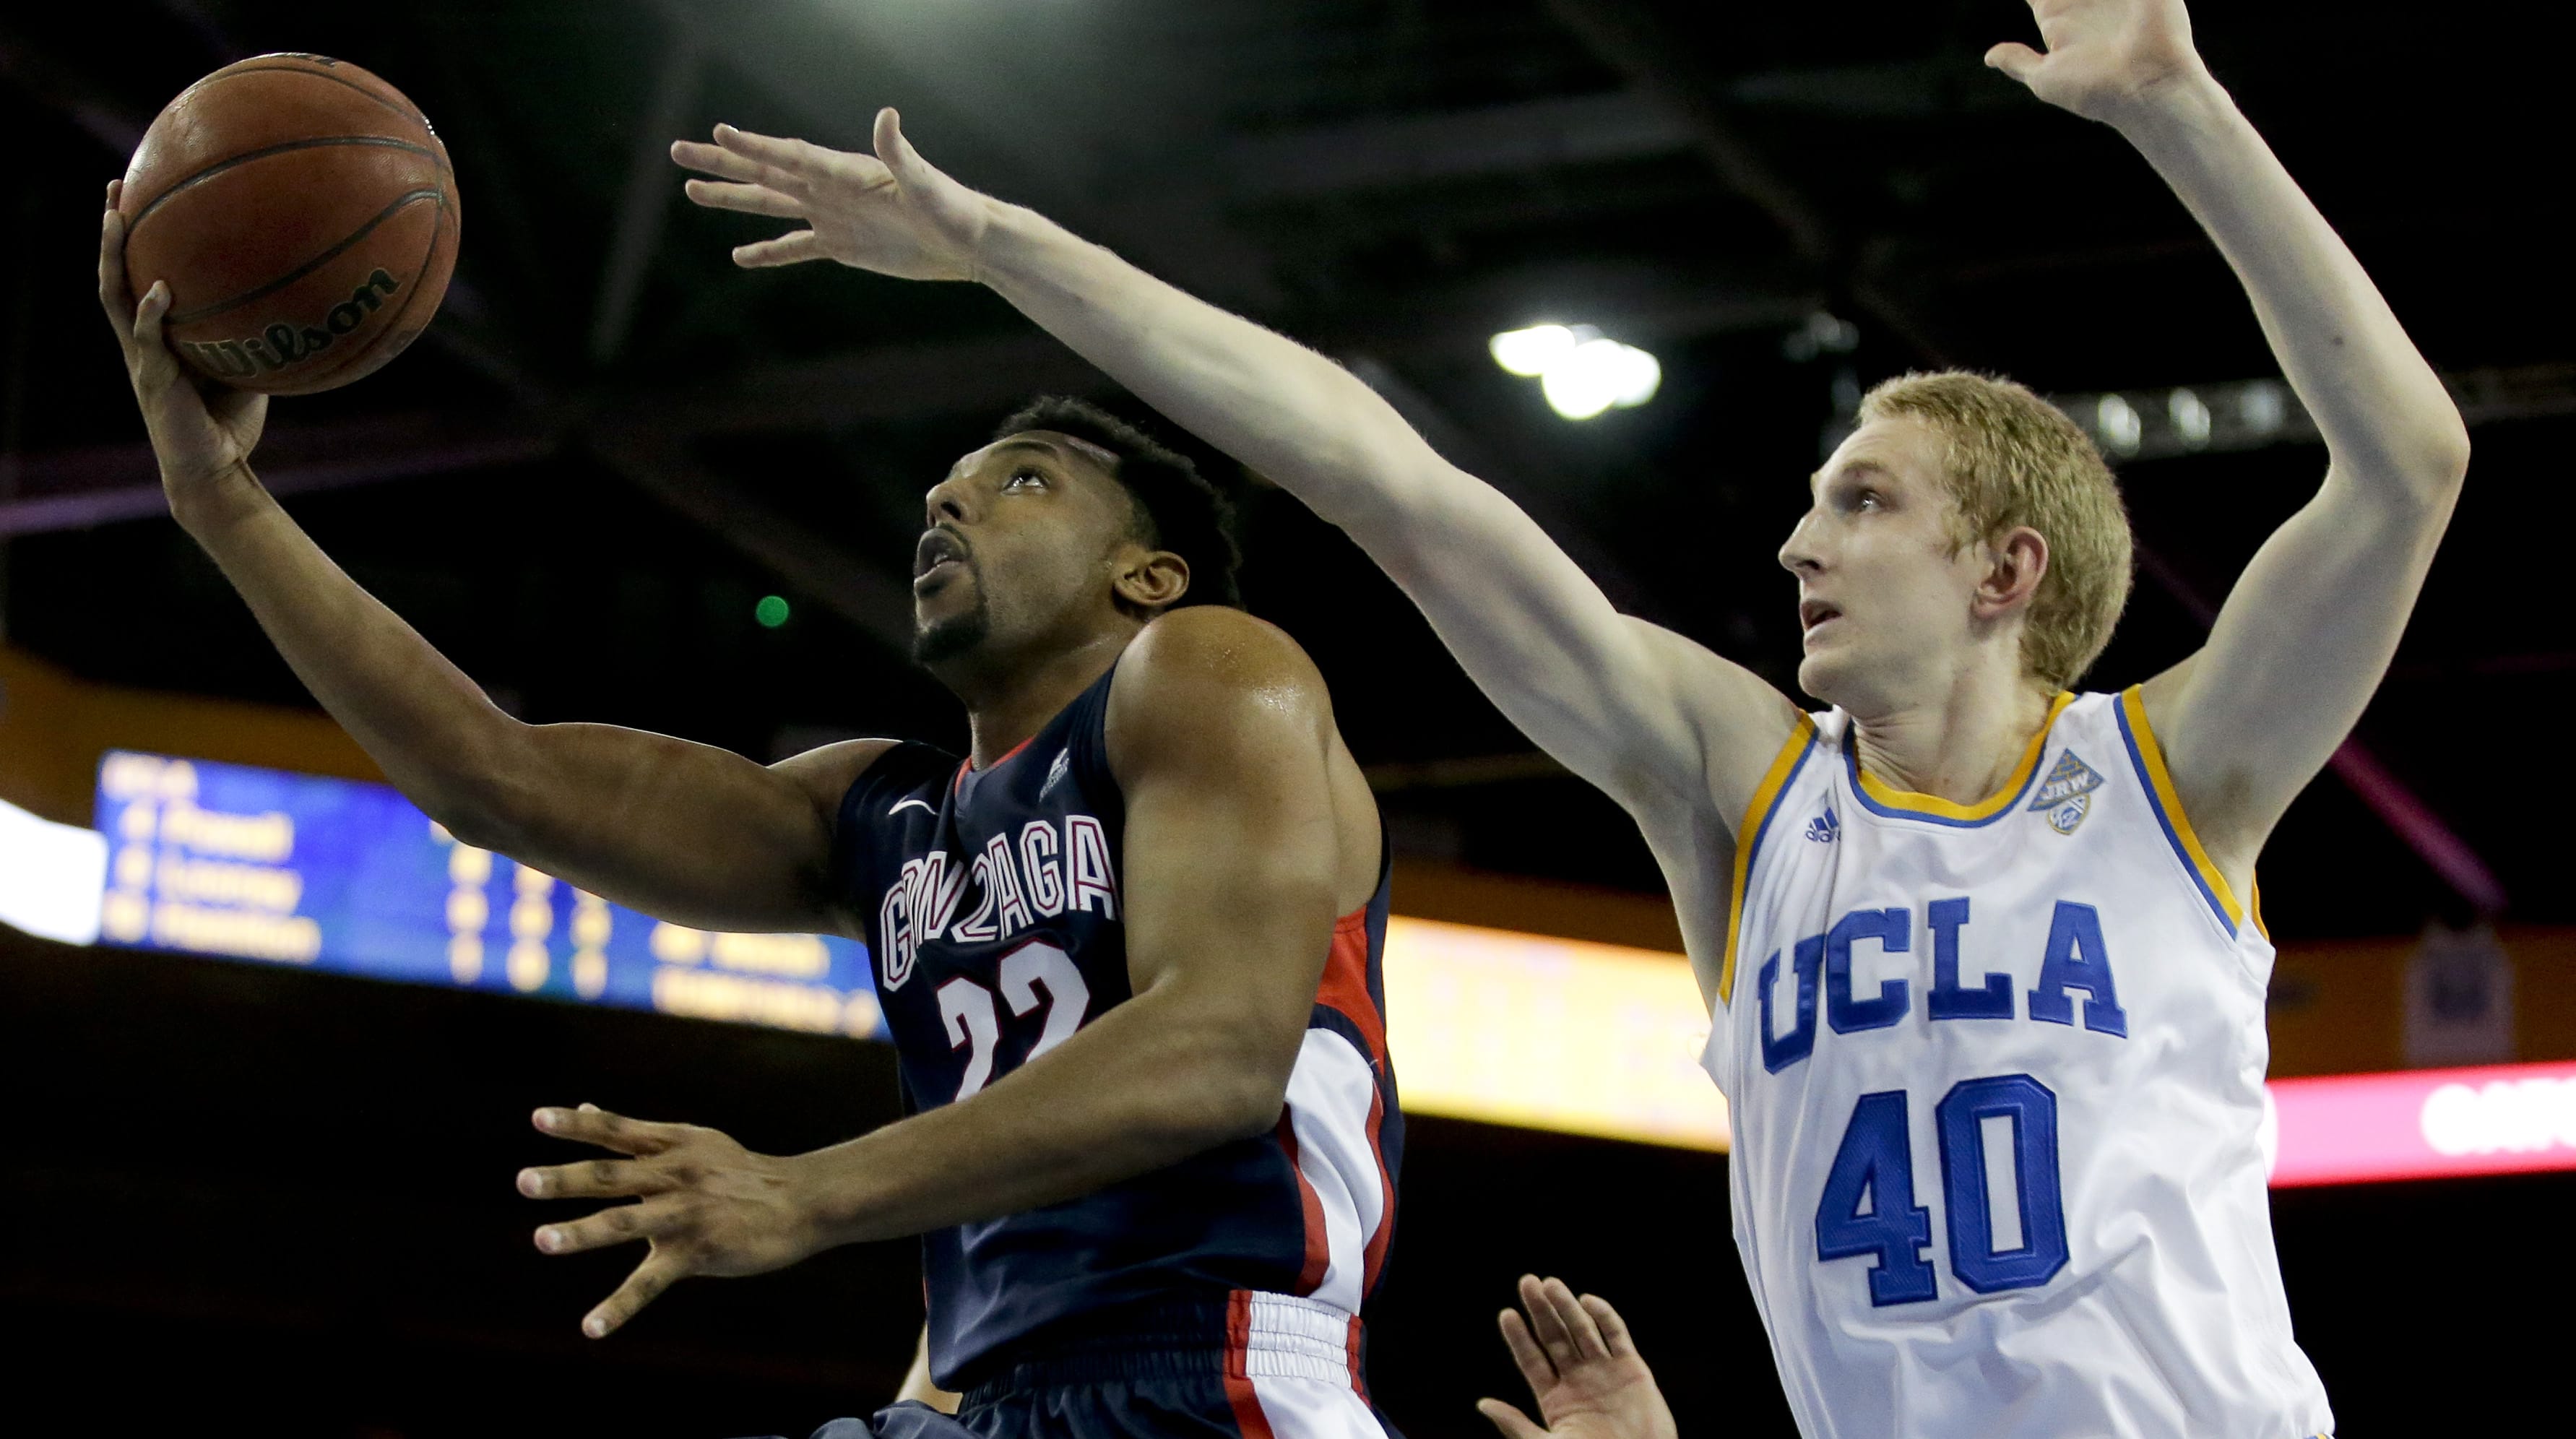 Gonzaga guard Byron Wesley, left, shots around UCLA center Thomas Welsh during the first half in Los Angeles, Saturday, Dec. 13, 2014.